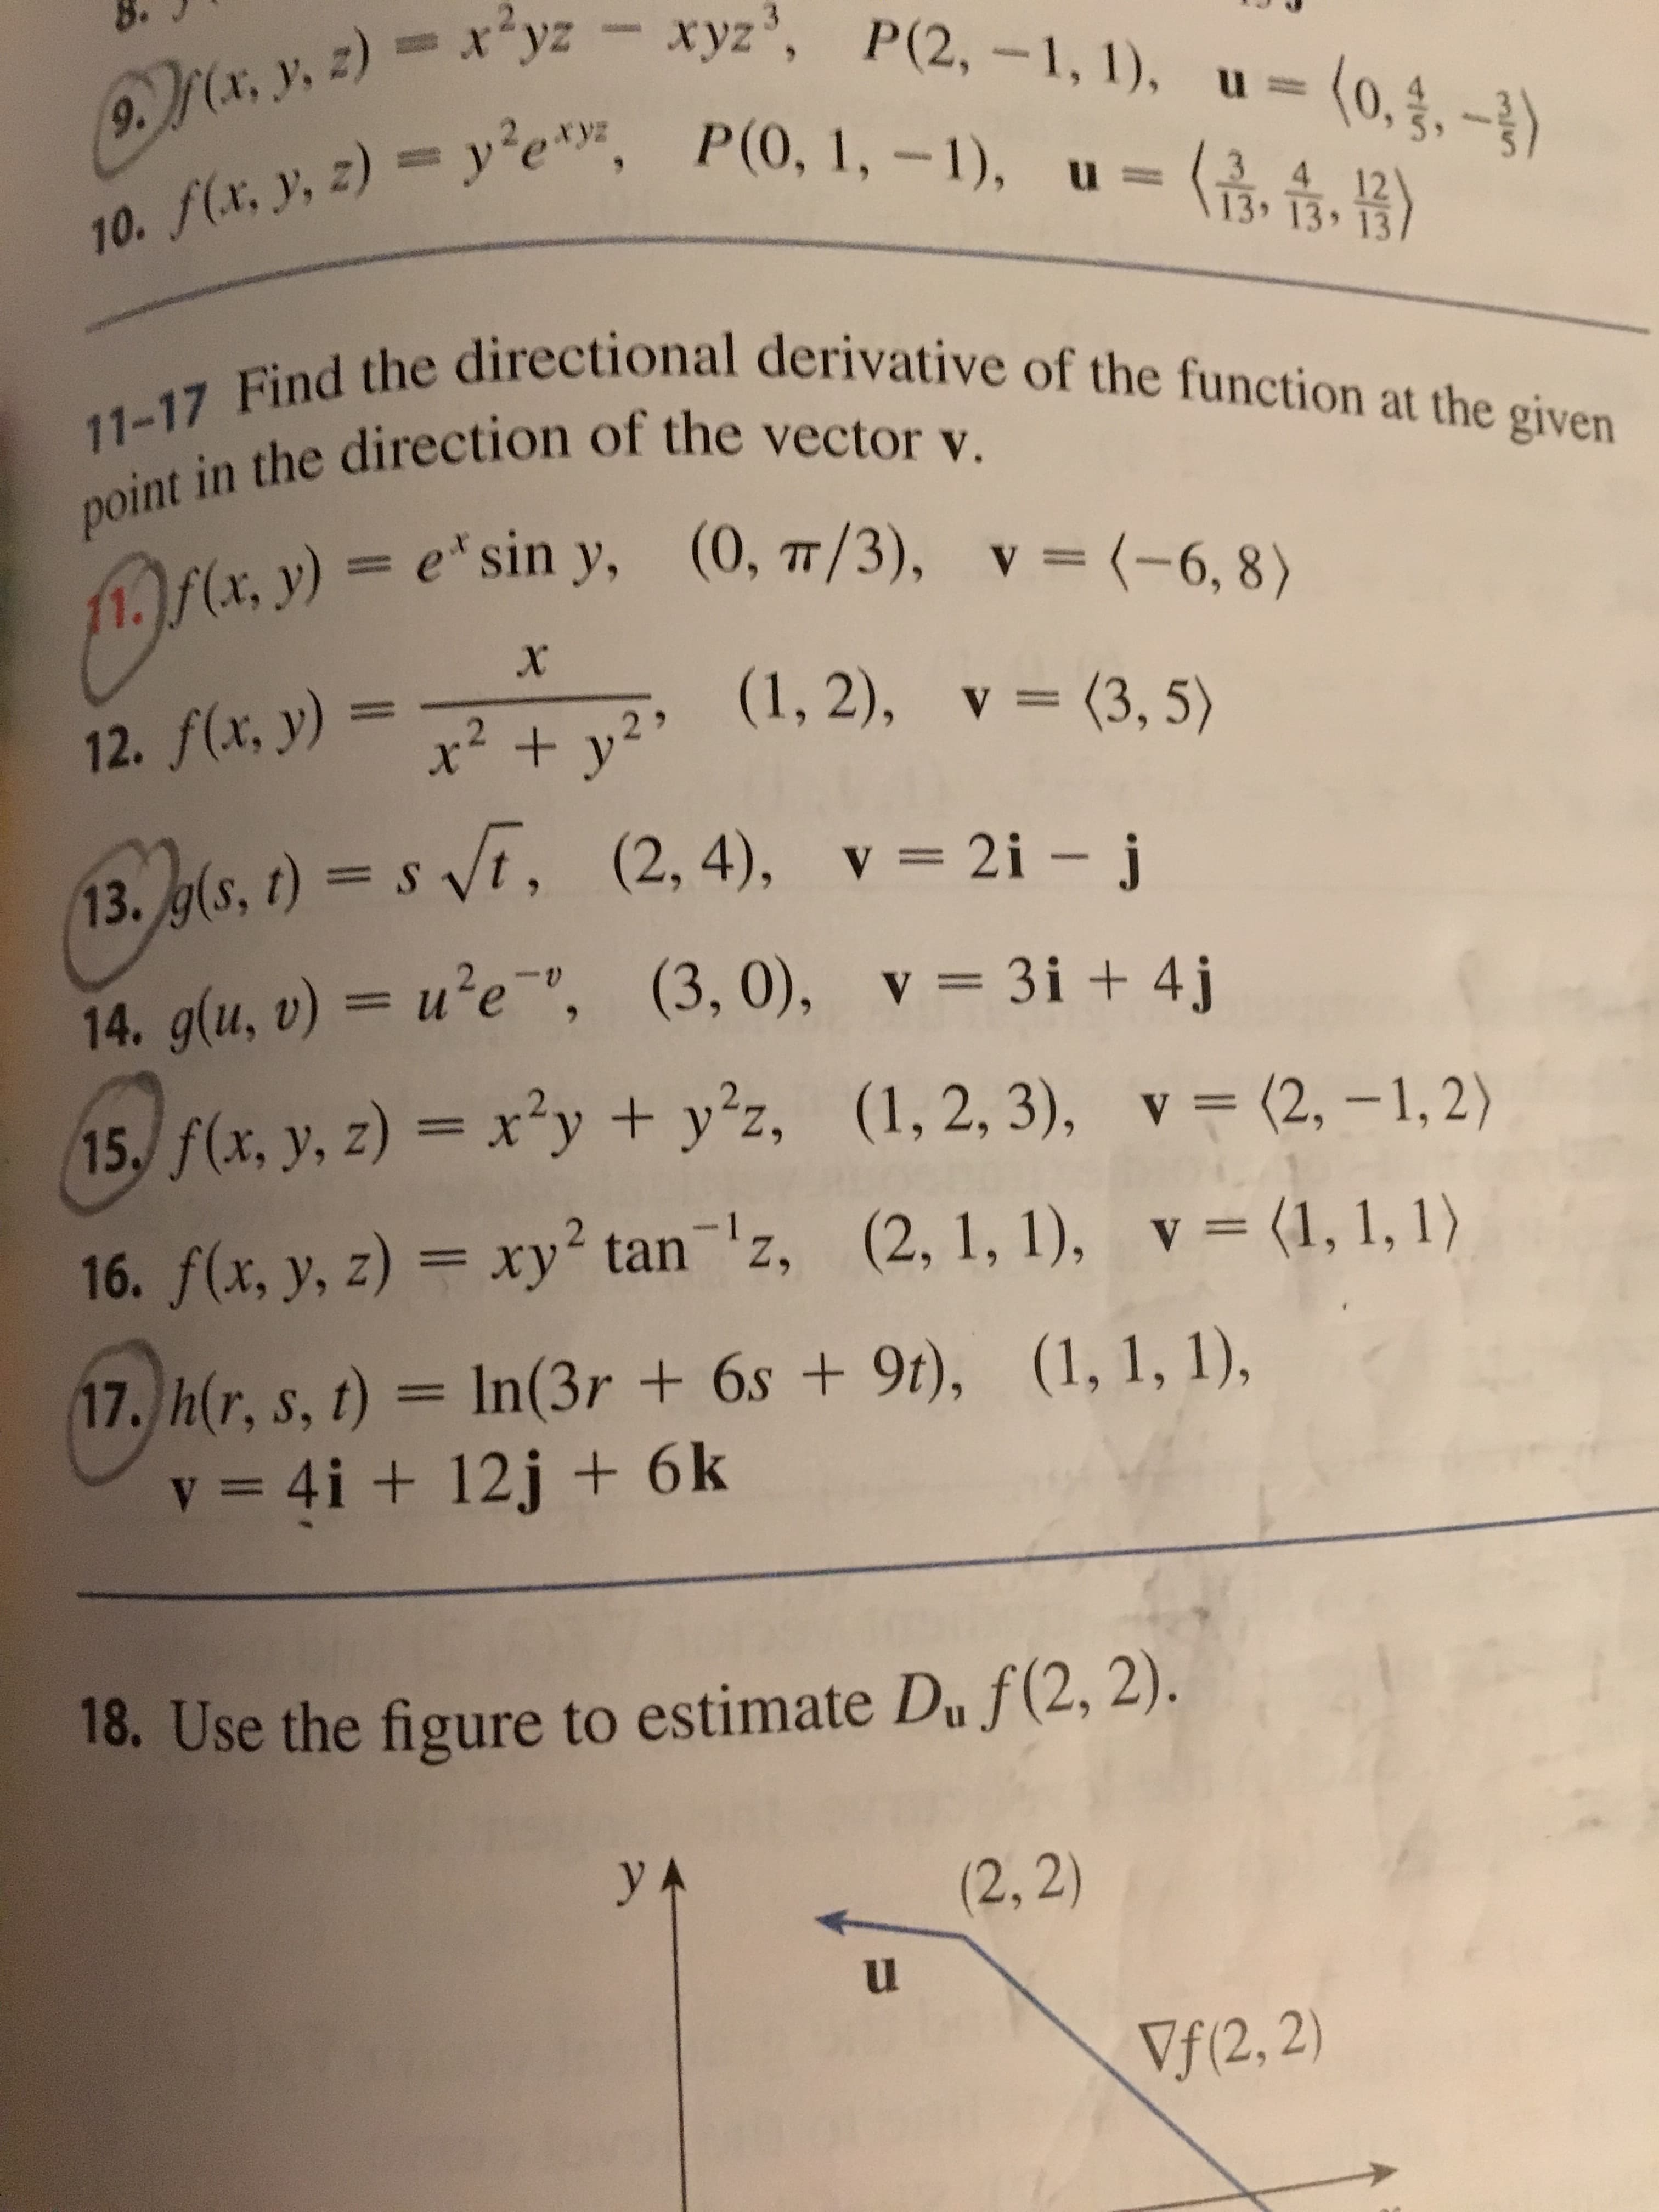 9.M(a, y, z)xyz xyz, P(2, -1, 1), u-
10. f(x, y, z) y'e, P(0, 1, -1), u-
11-17 Find the directional derivative of the function at the given
(0,.-)
4 12
13, 13
point in the direction of the vector v.
(x. y) = e' sin y,
(0, T/3),
v= (-6, 8)
X
2 >
(1, 2), v = (3,5)
2. f(x, y)
(2, 4),
13. g(s, t) st,
2i - j
v
14. g(u, v) = u?e , (3, 0), v 3i + 4j
(1, 2, 3), v = (2, -1,2)
15, f(x, y, z) = x'y + yz,
WHG
16. f(x, y, z) = xy tan z, (2, 1, 1), v= (1, 1, 1)
17, h(r, s, t) = In (3r +6s +9t), (1, 1, 1),
v = 4i + 12j + 6k
18. Use the figure to estimate Du f(2, 2).
у
(2,2)
Vf(2, 2)
